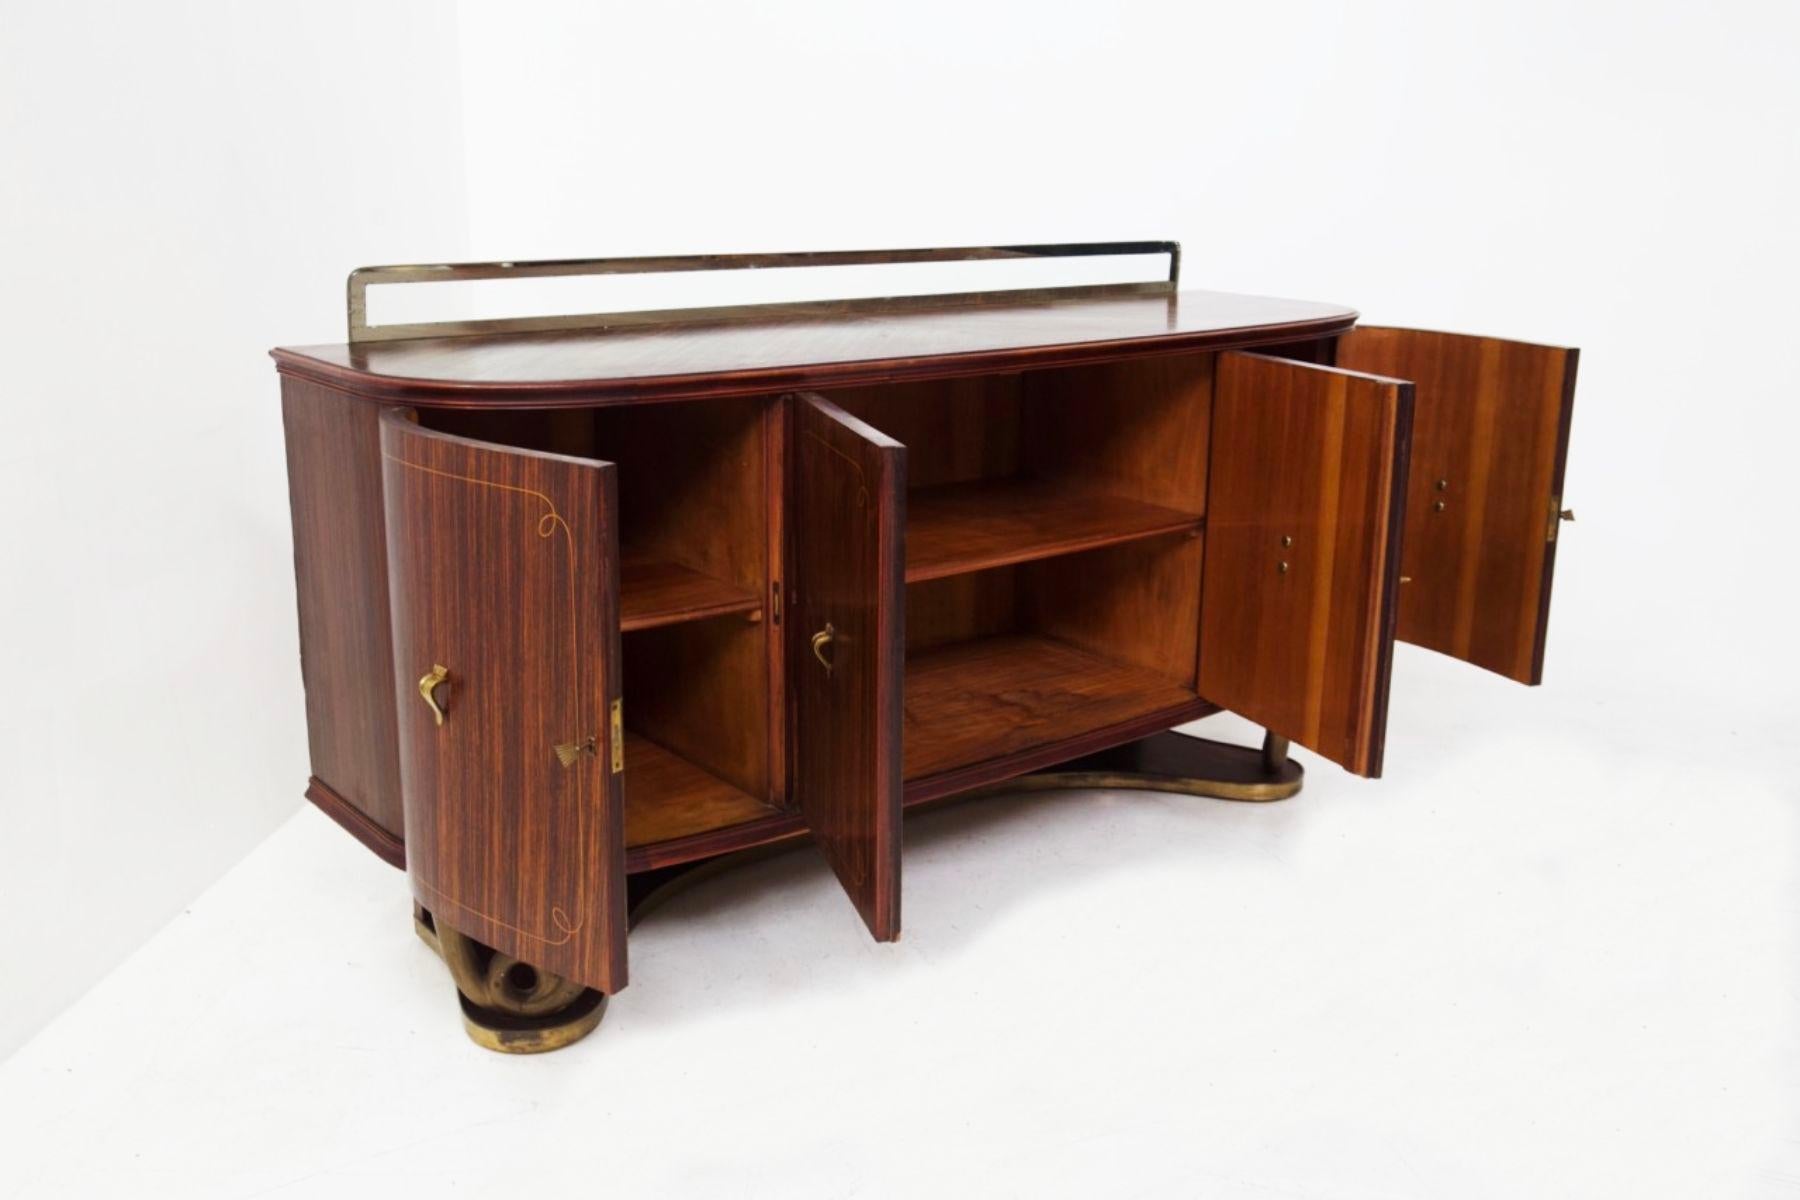 A splendid Mid-Century sideboard attributed to the great 1950s designer Paolo Buffa.
The sideboard is entirely made of the finest wood with beautiful soft and evident grain.
The base is made of wood with a brass frame. Two eccentric feet form a very